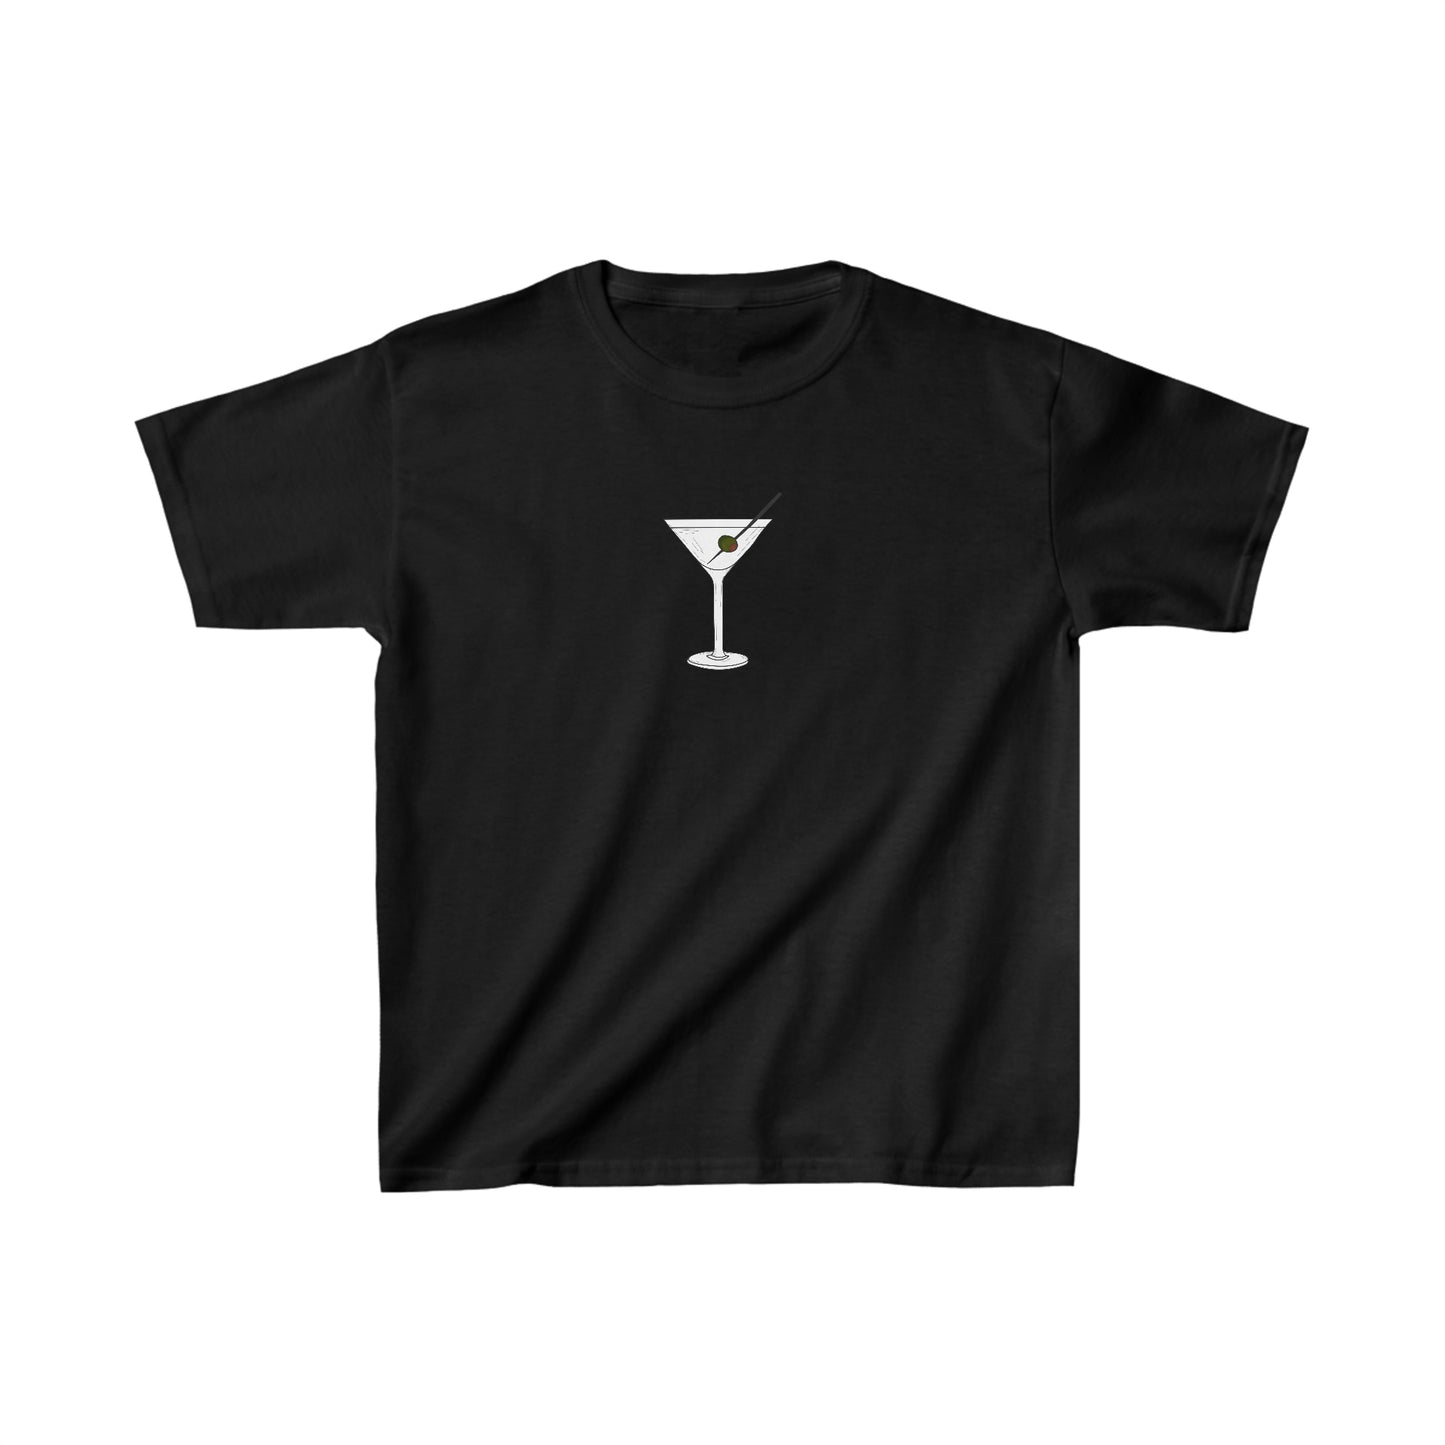 Dirty Martini Boxy Fit Baby Tee